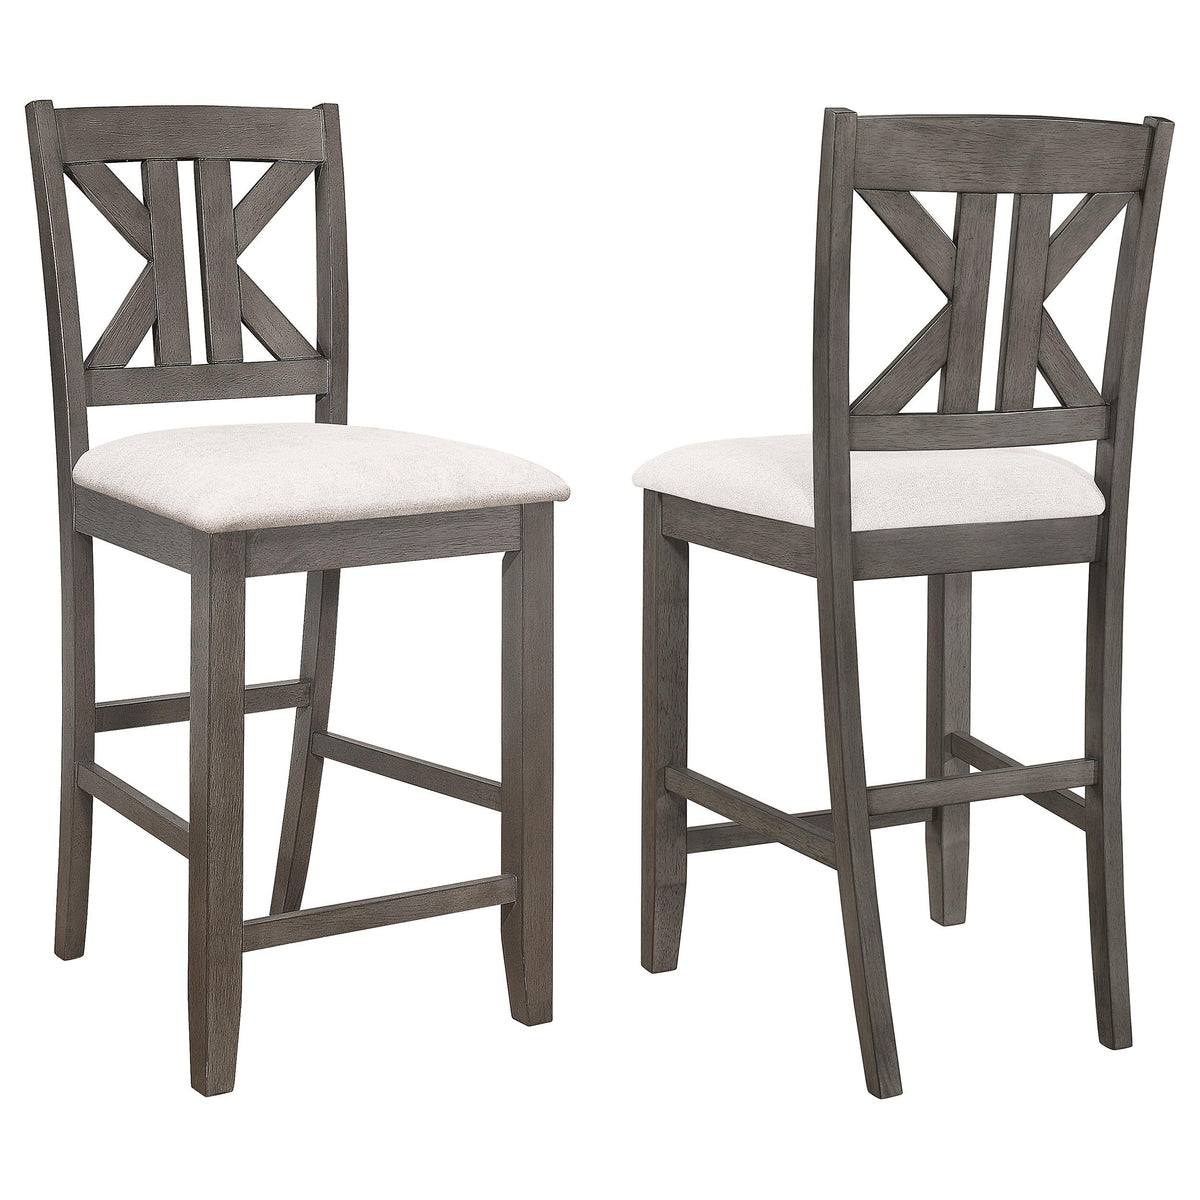 Athens Upholstered Seat Counter Height Stools Light Tan (Set of 2)  Las Vegas Furniture Stores